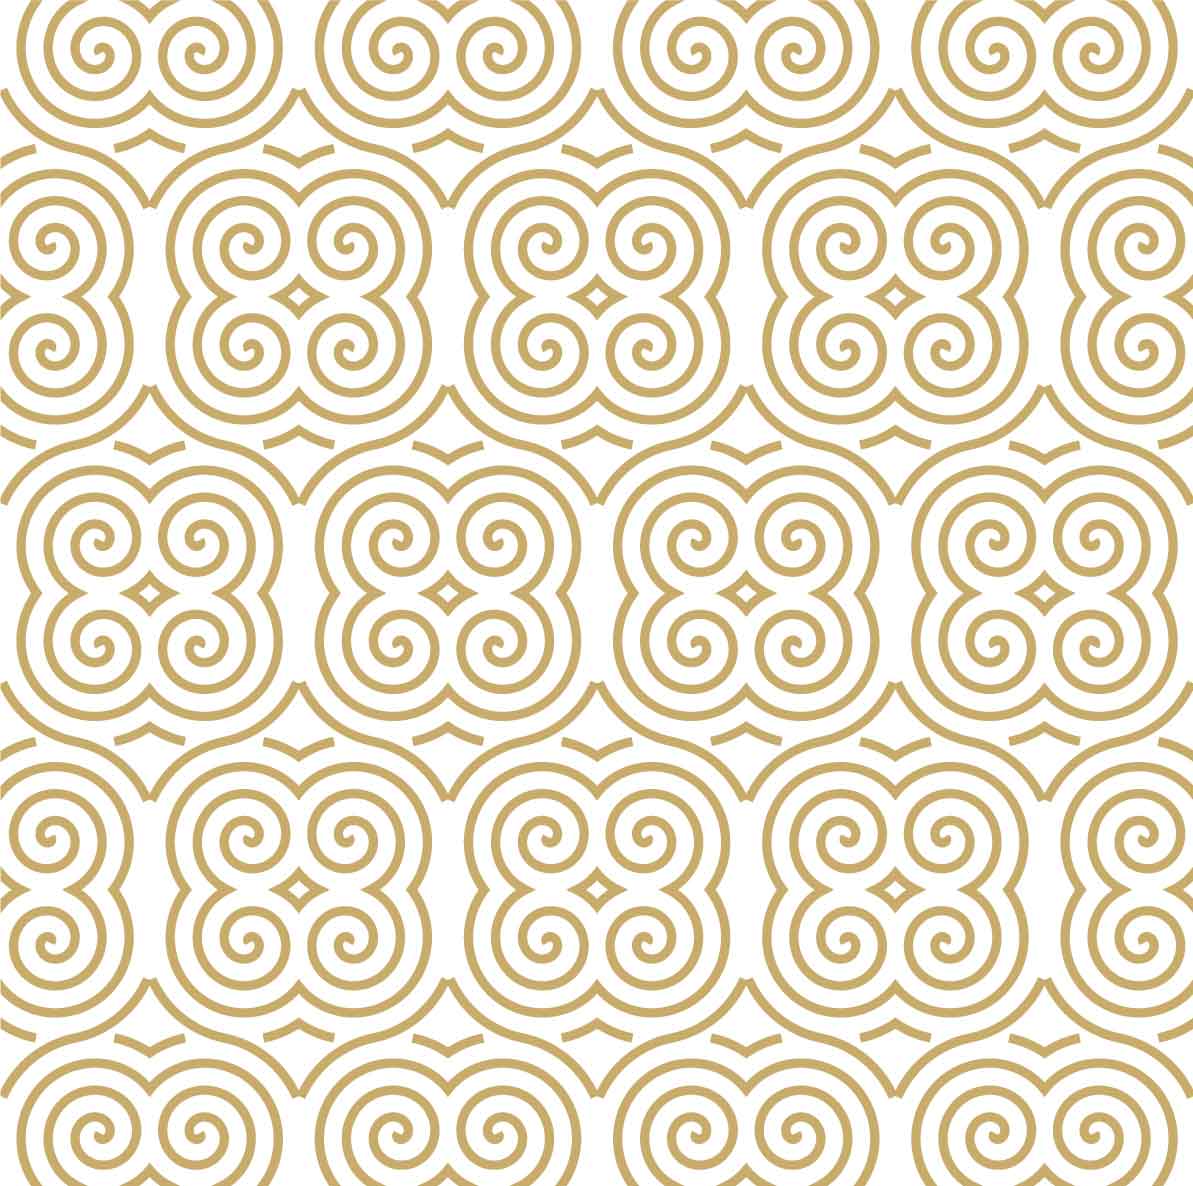 White and gold pattern with a spiral design.